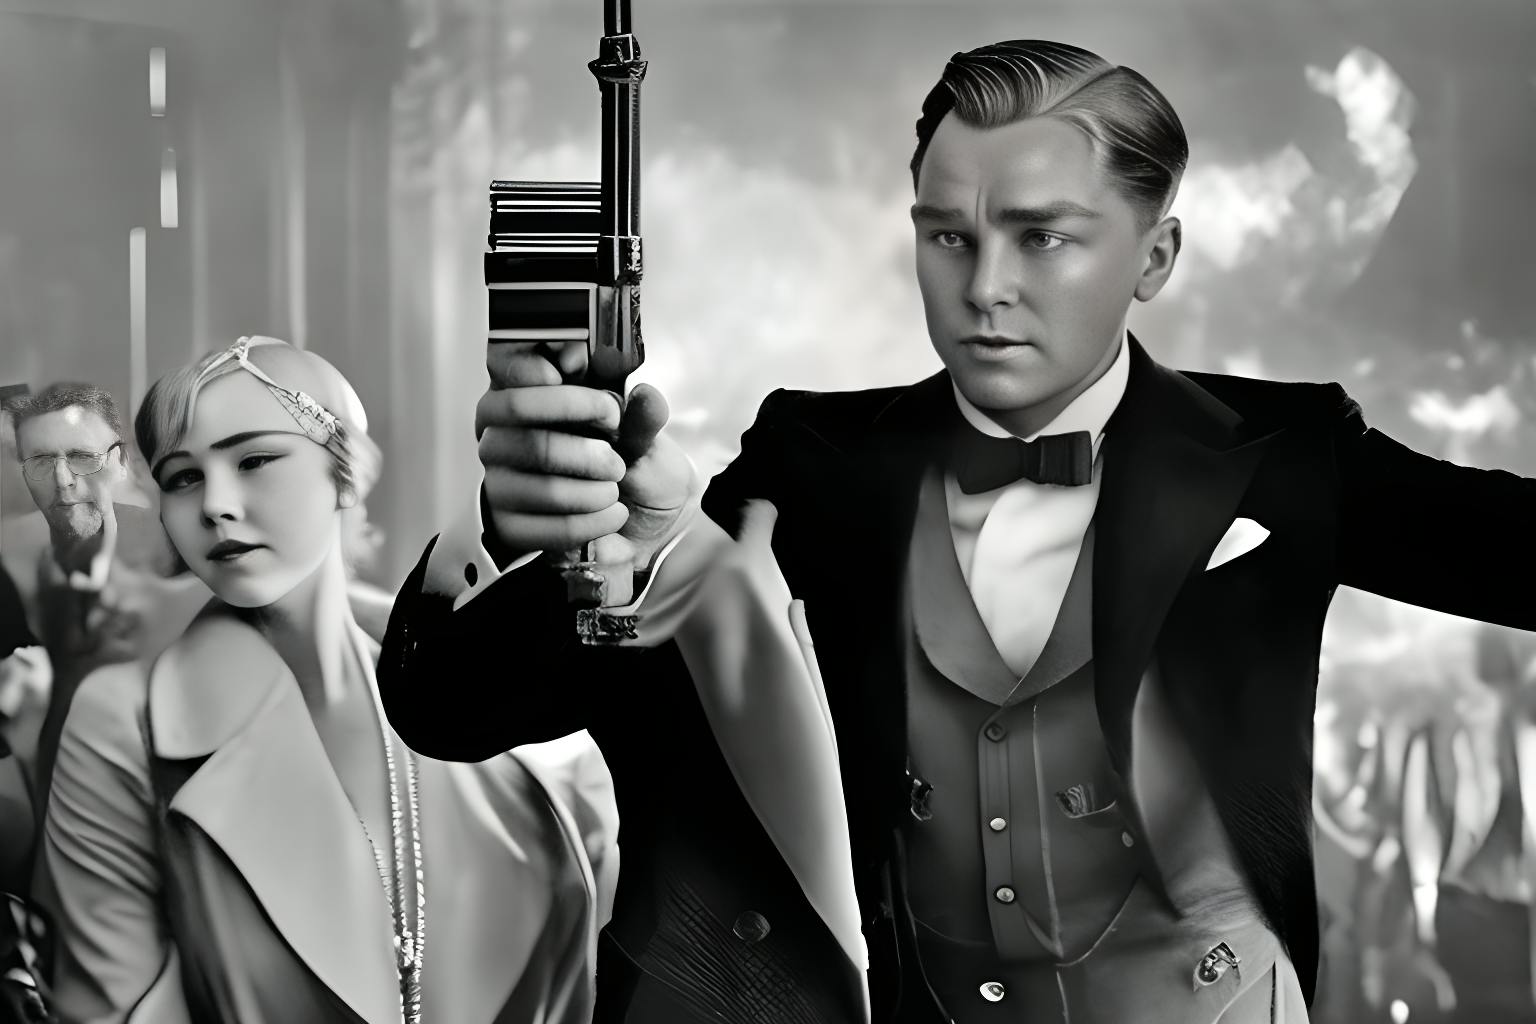 featured image - ChatGPT Writes The Great Gatsby Set in a Zombie Apocalypse